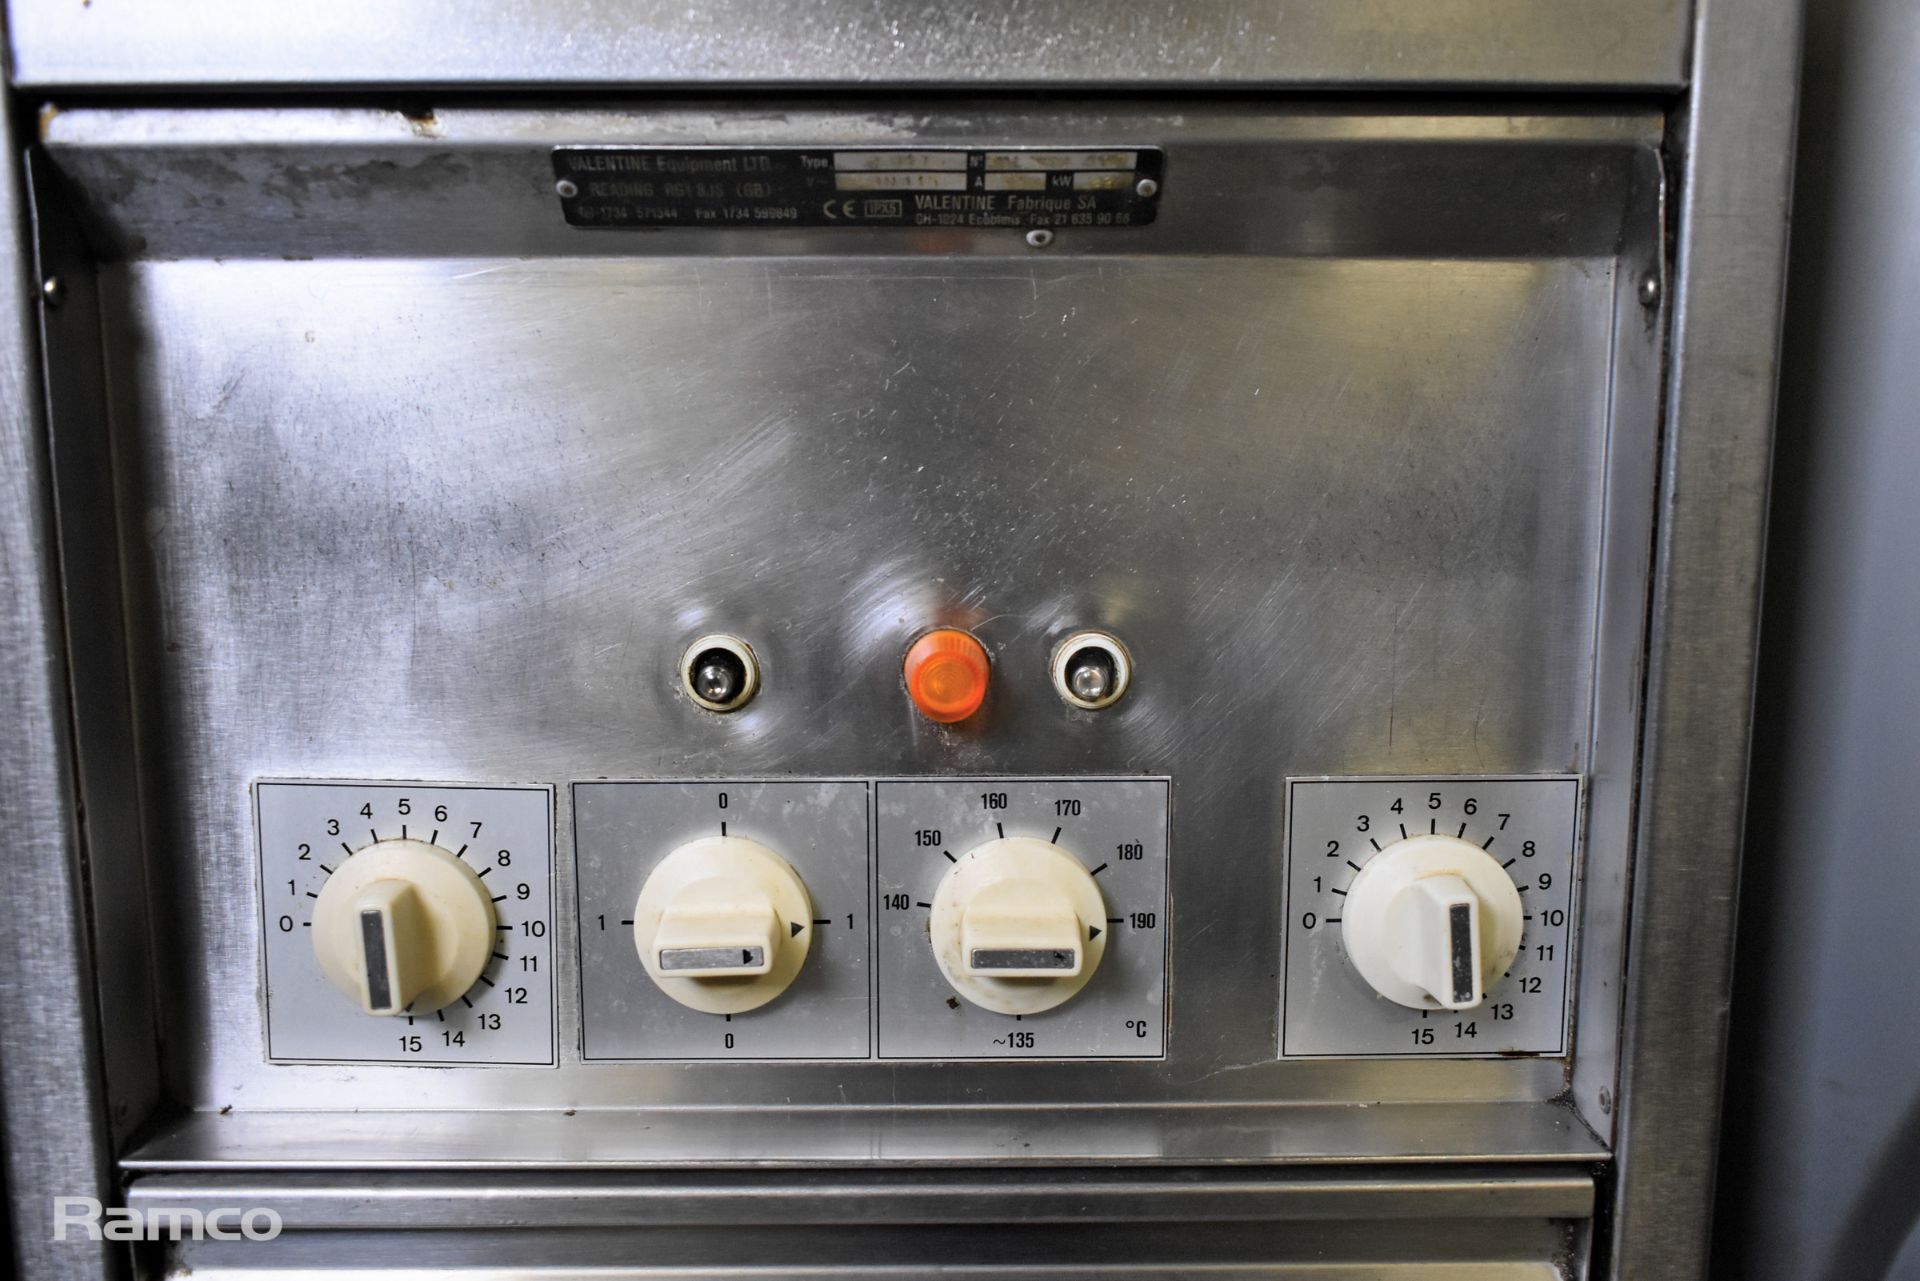 Valentine Equipment C94T stainless steel single tank electric fryer - W 400 x D 600 x H 850mm - Image 3 of 8